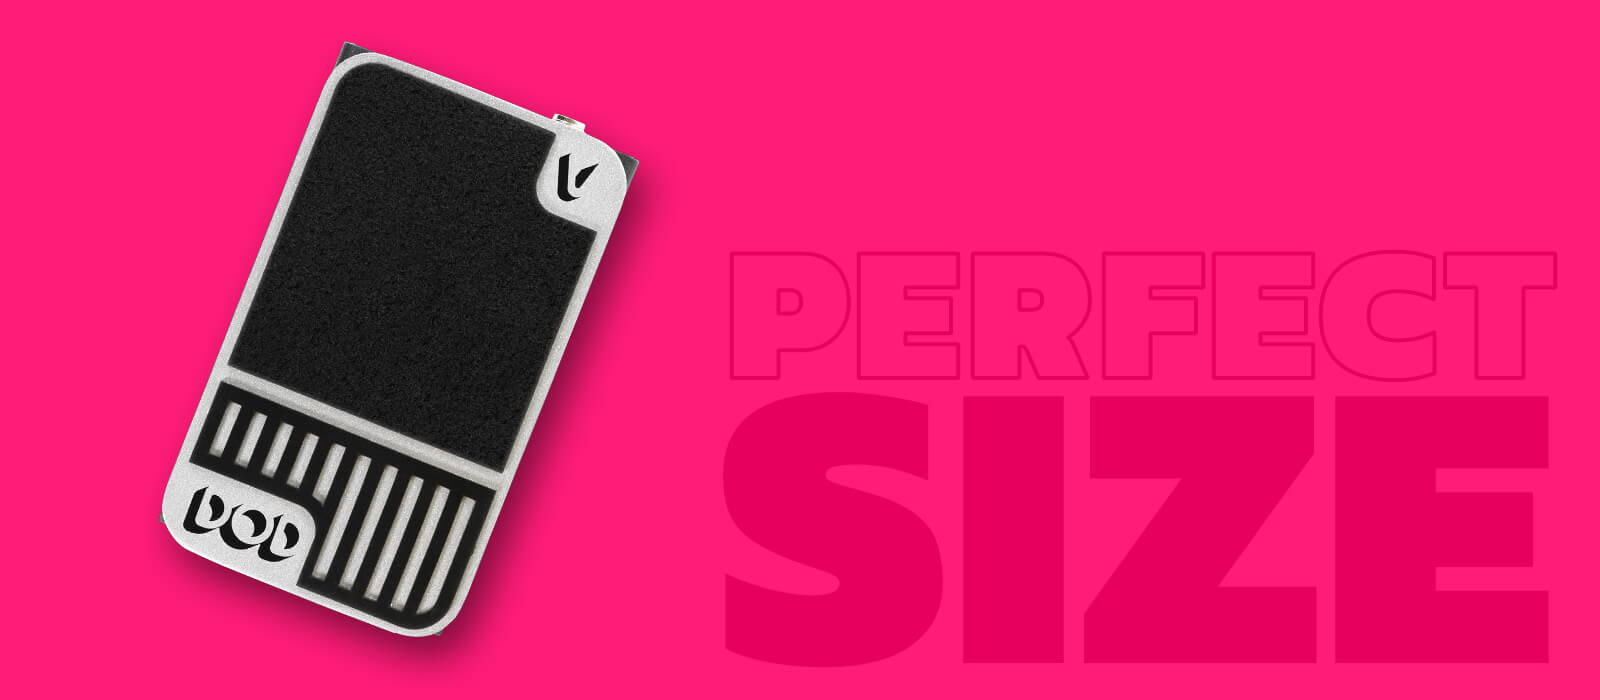 DOD Mini Volume ultra compact volume guitar pedal in black and silver with pink background that says 